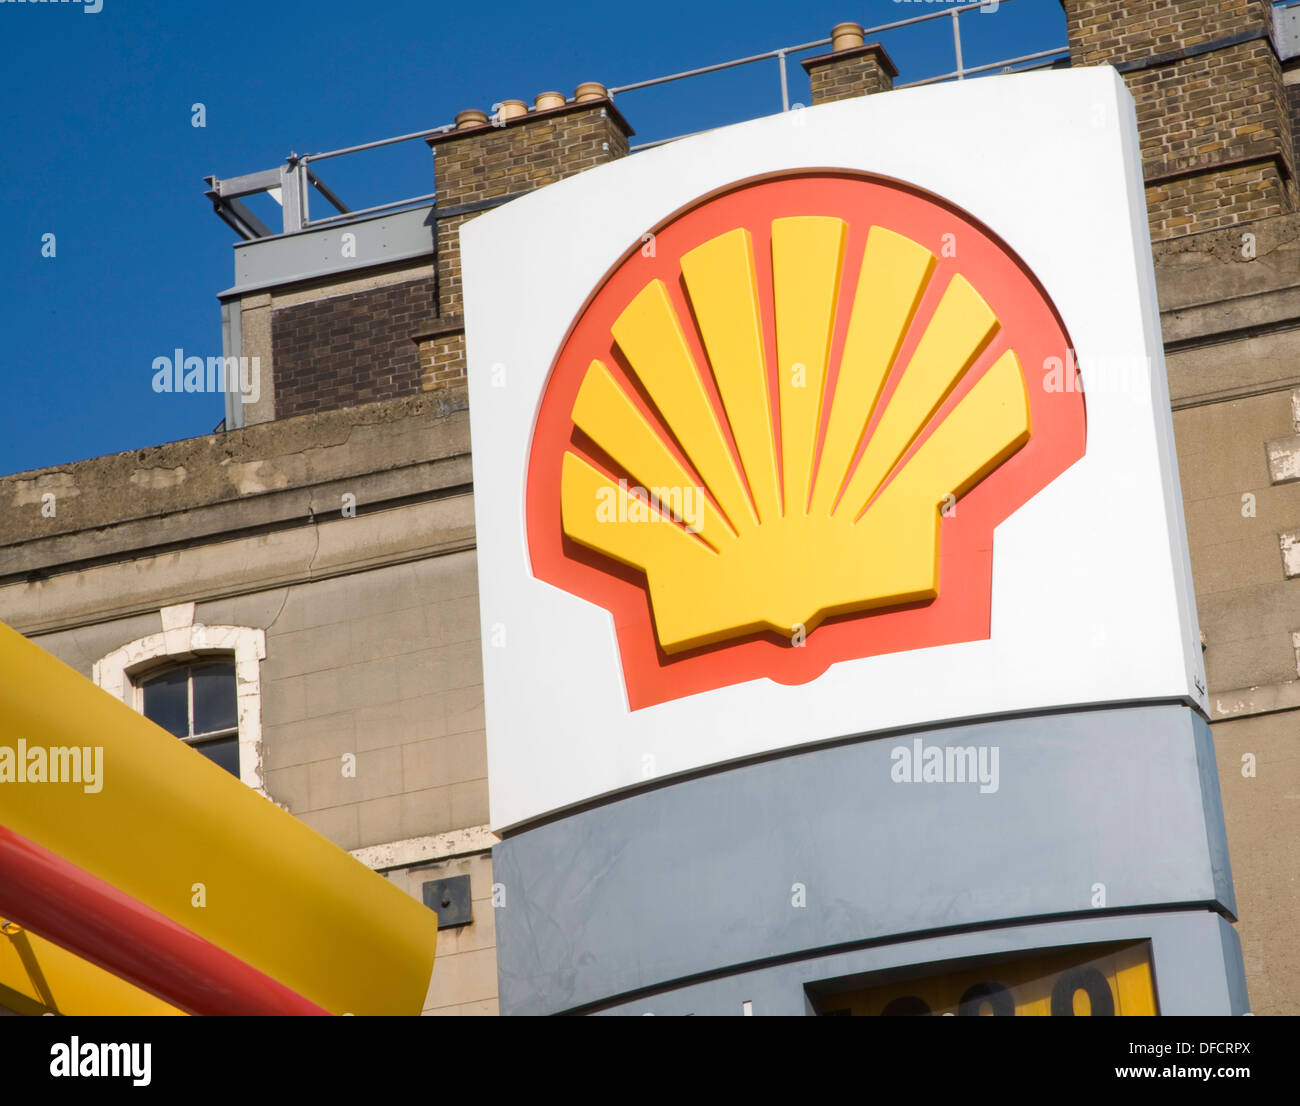 Shell petrol station garage sign in London Stock Photo